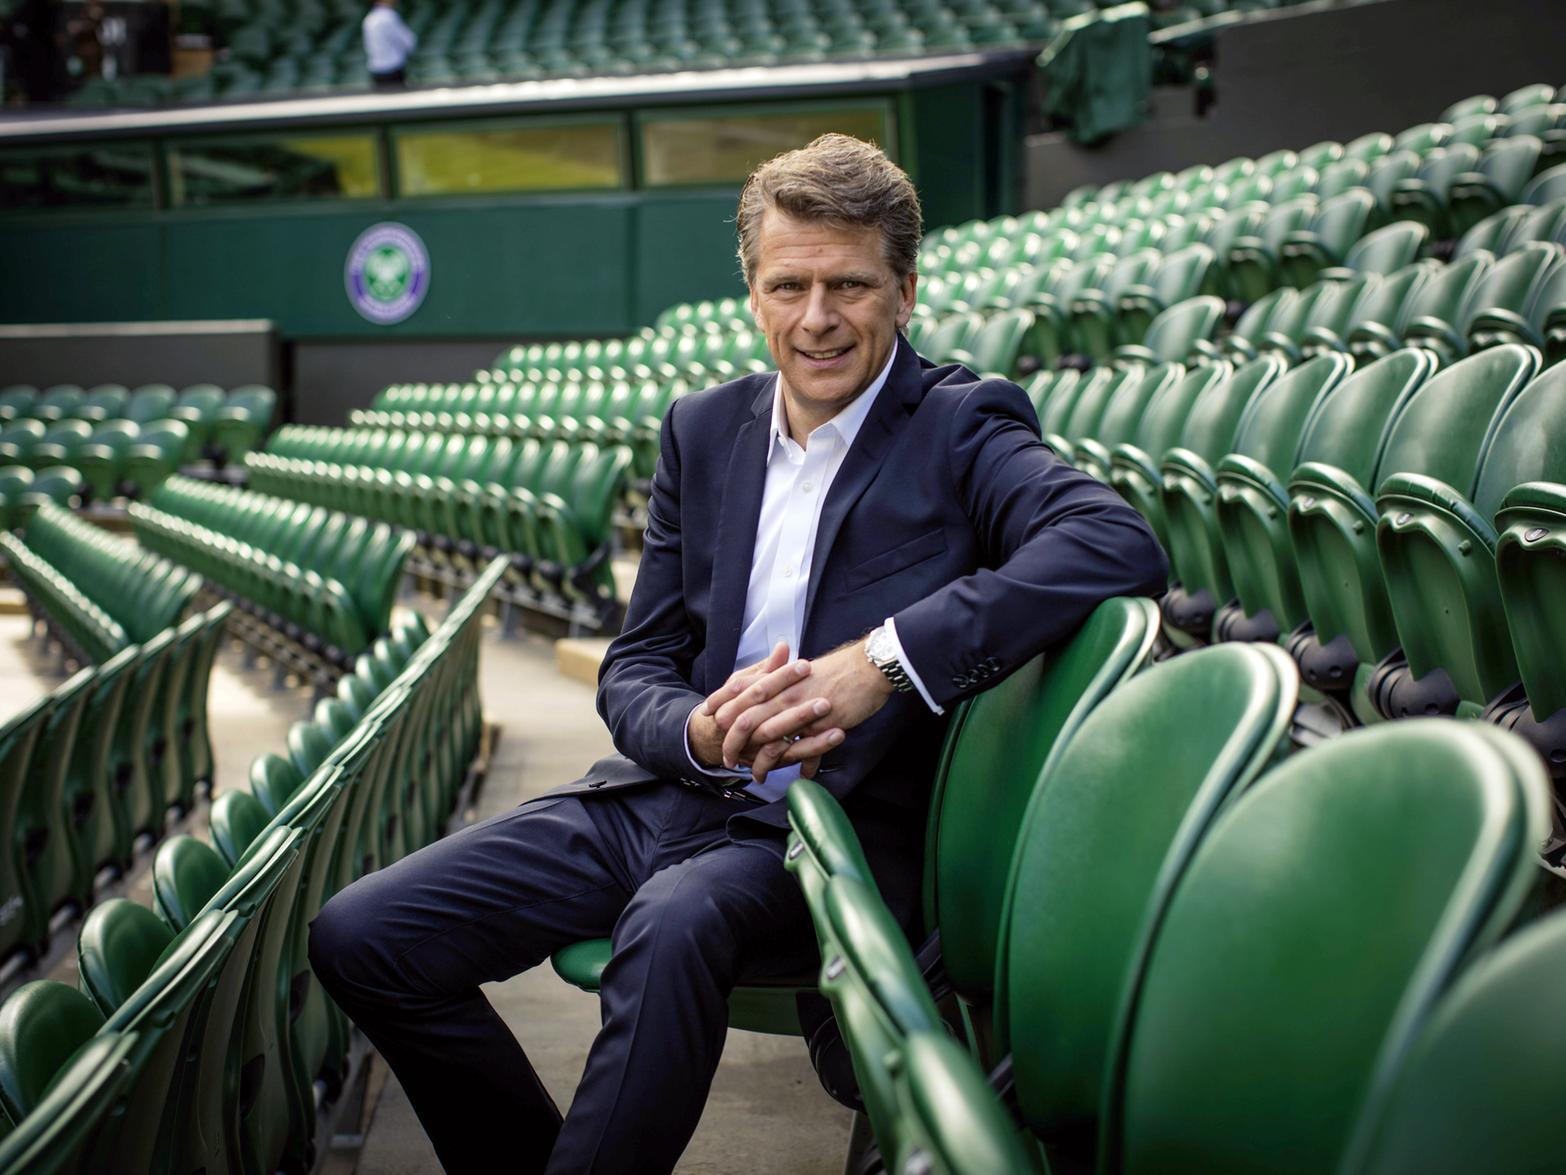 BBC Wimbledon tennis commentator Andrew Castle excited for courtside return